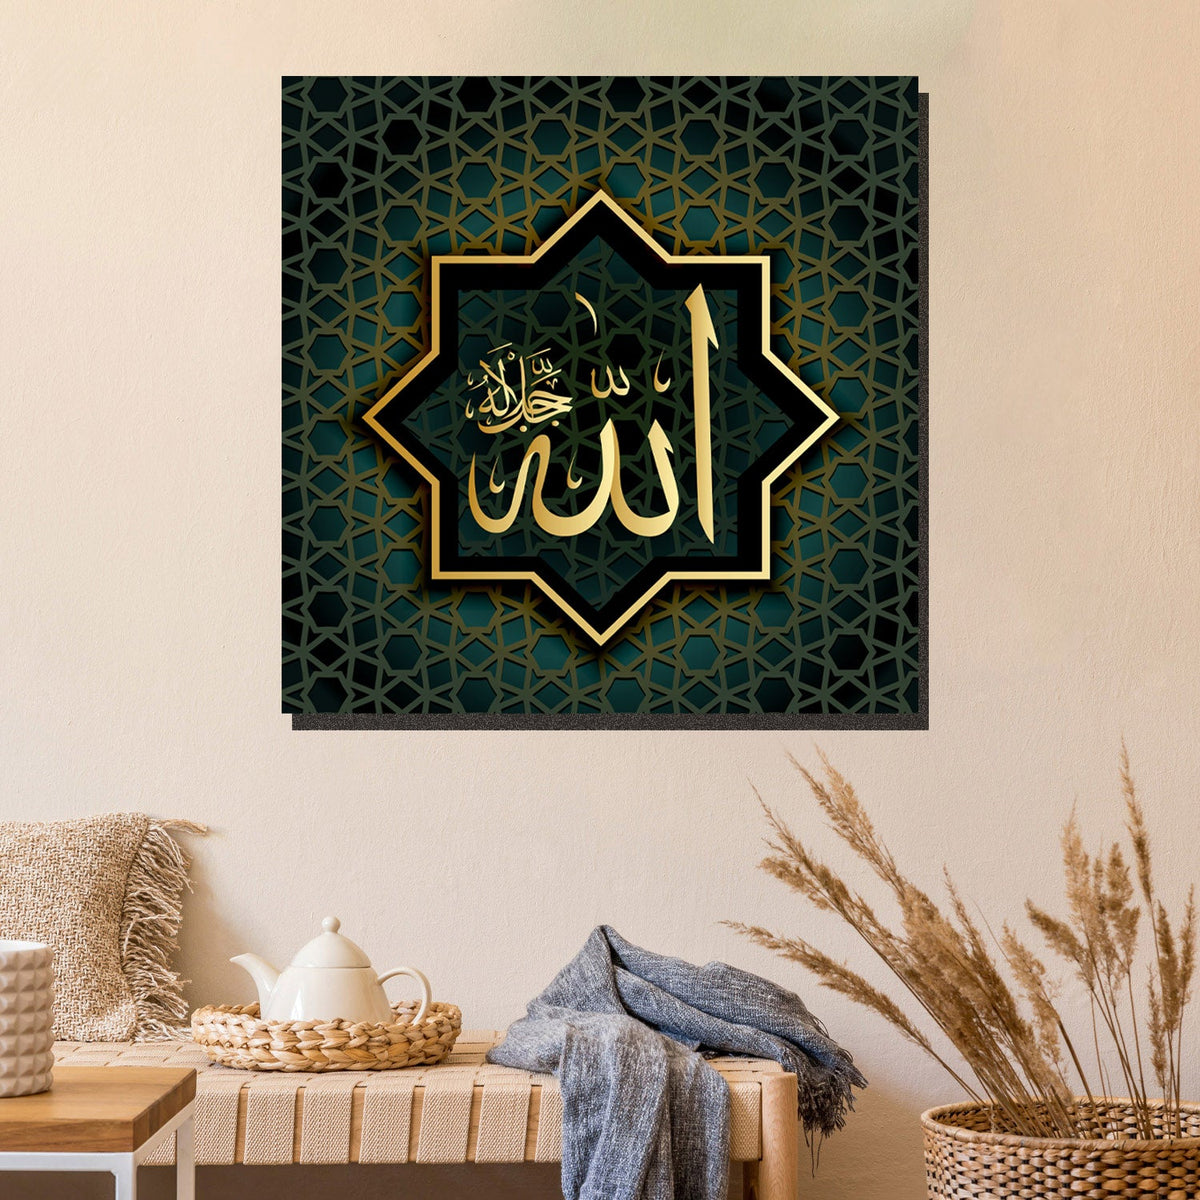 https://cdn.shopify.com/s/files/1/0387/9986/8044/products/IslamicArtLimitedEdition13CanvasArtprintStretched-4.jpg